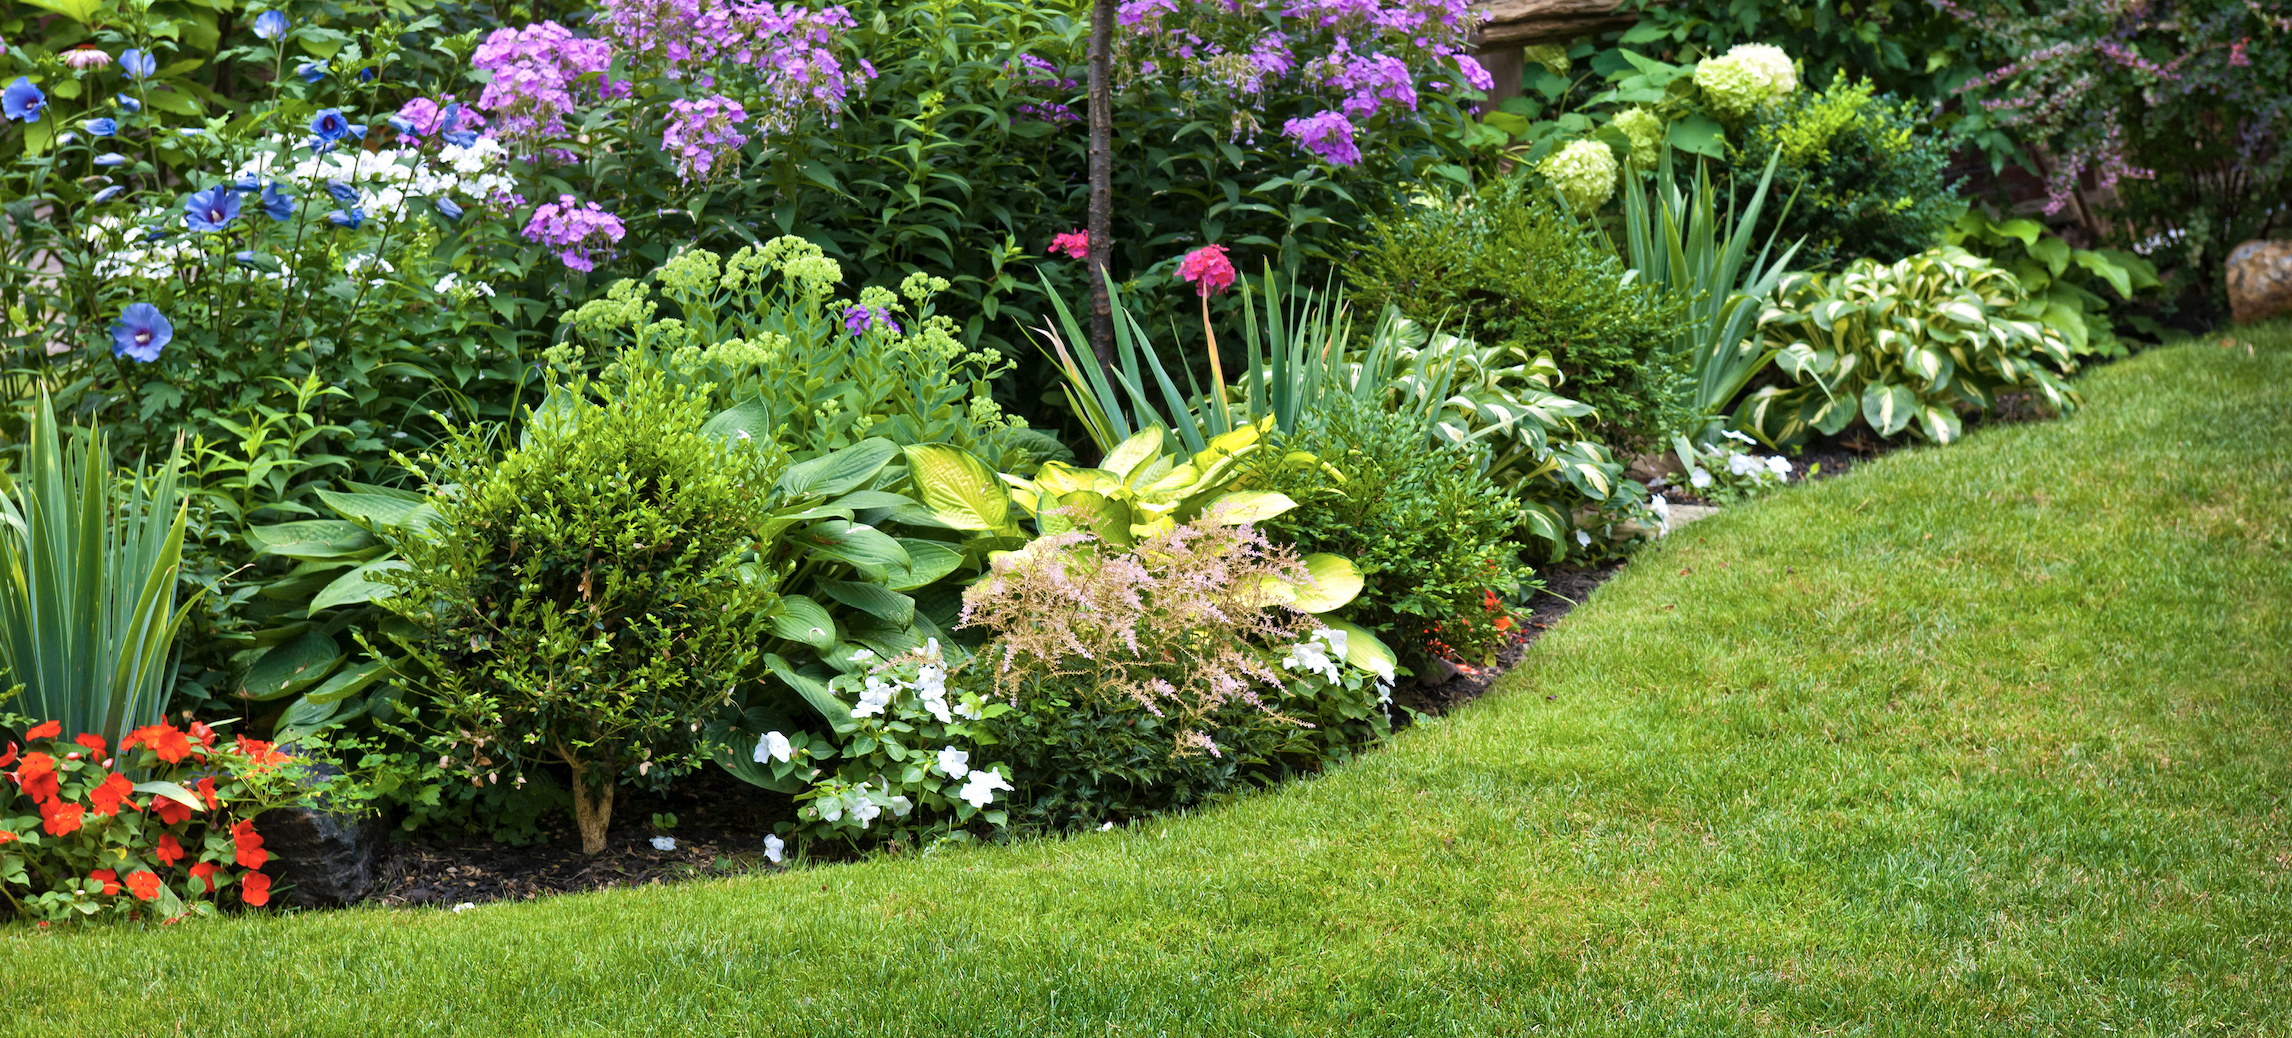 Annual Flowers, Enhancements & The Importance Of Curb Appeal